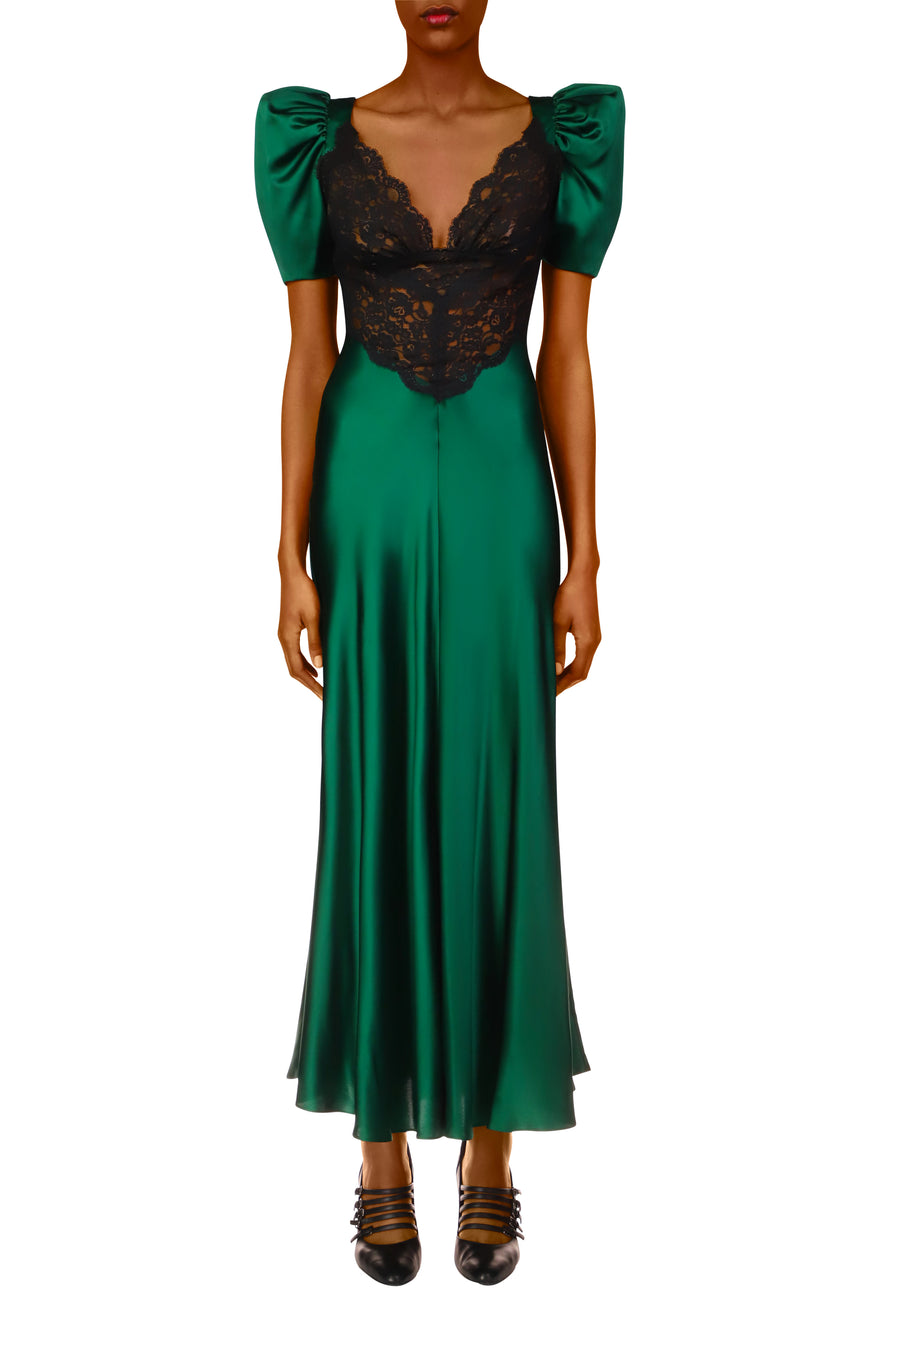 Green Silk Short Sleeve Dress With Black Lace Details